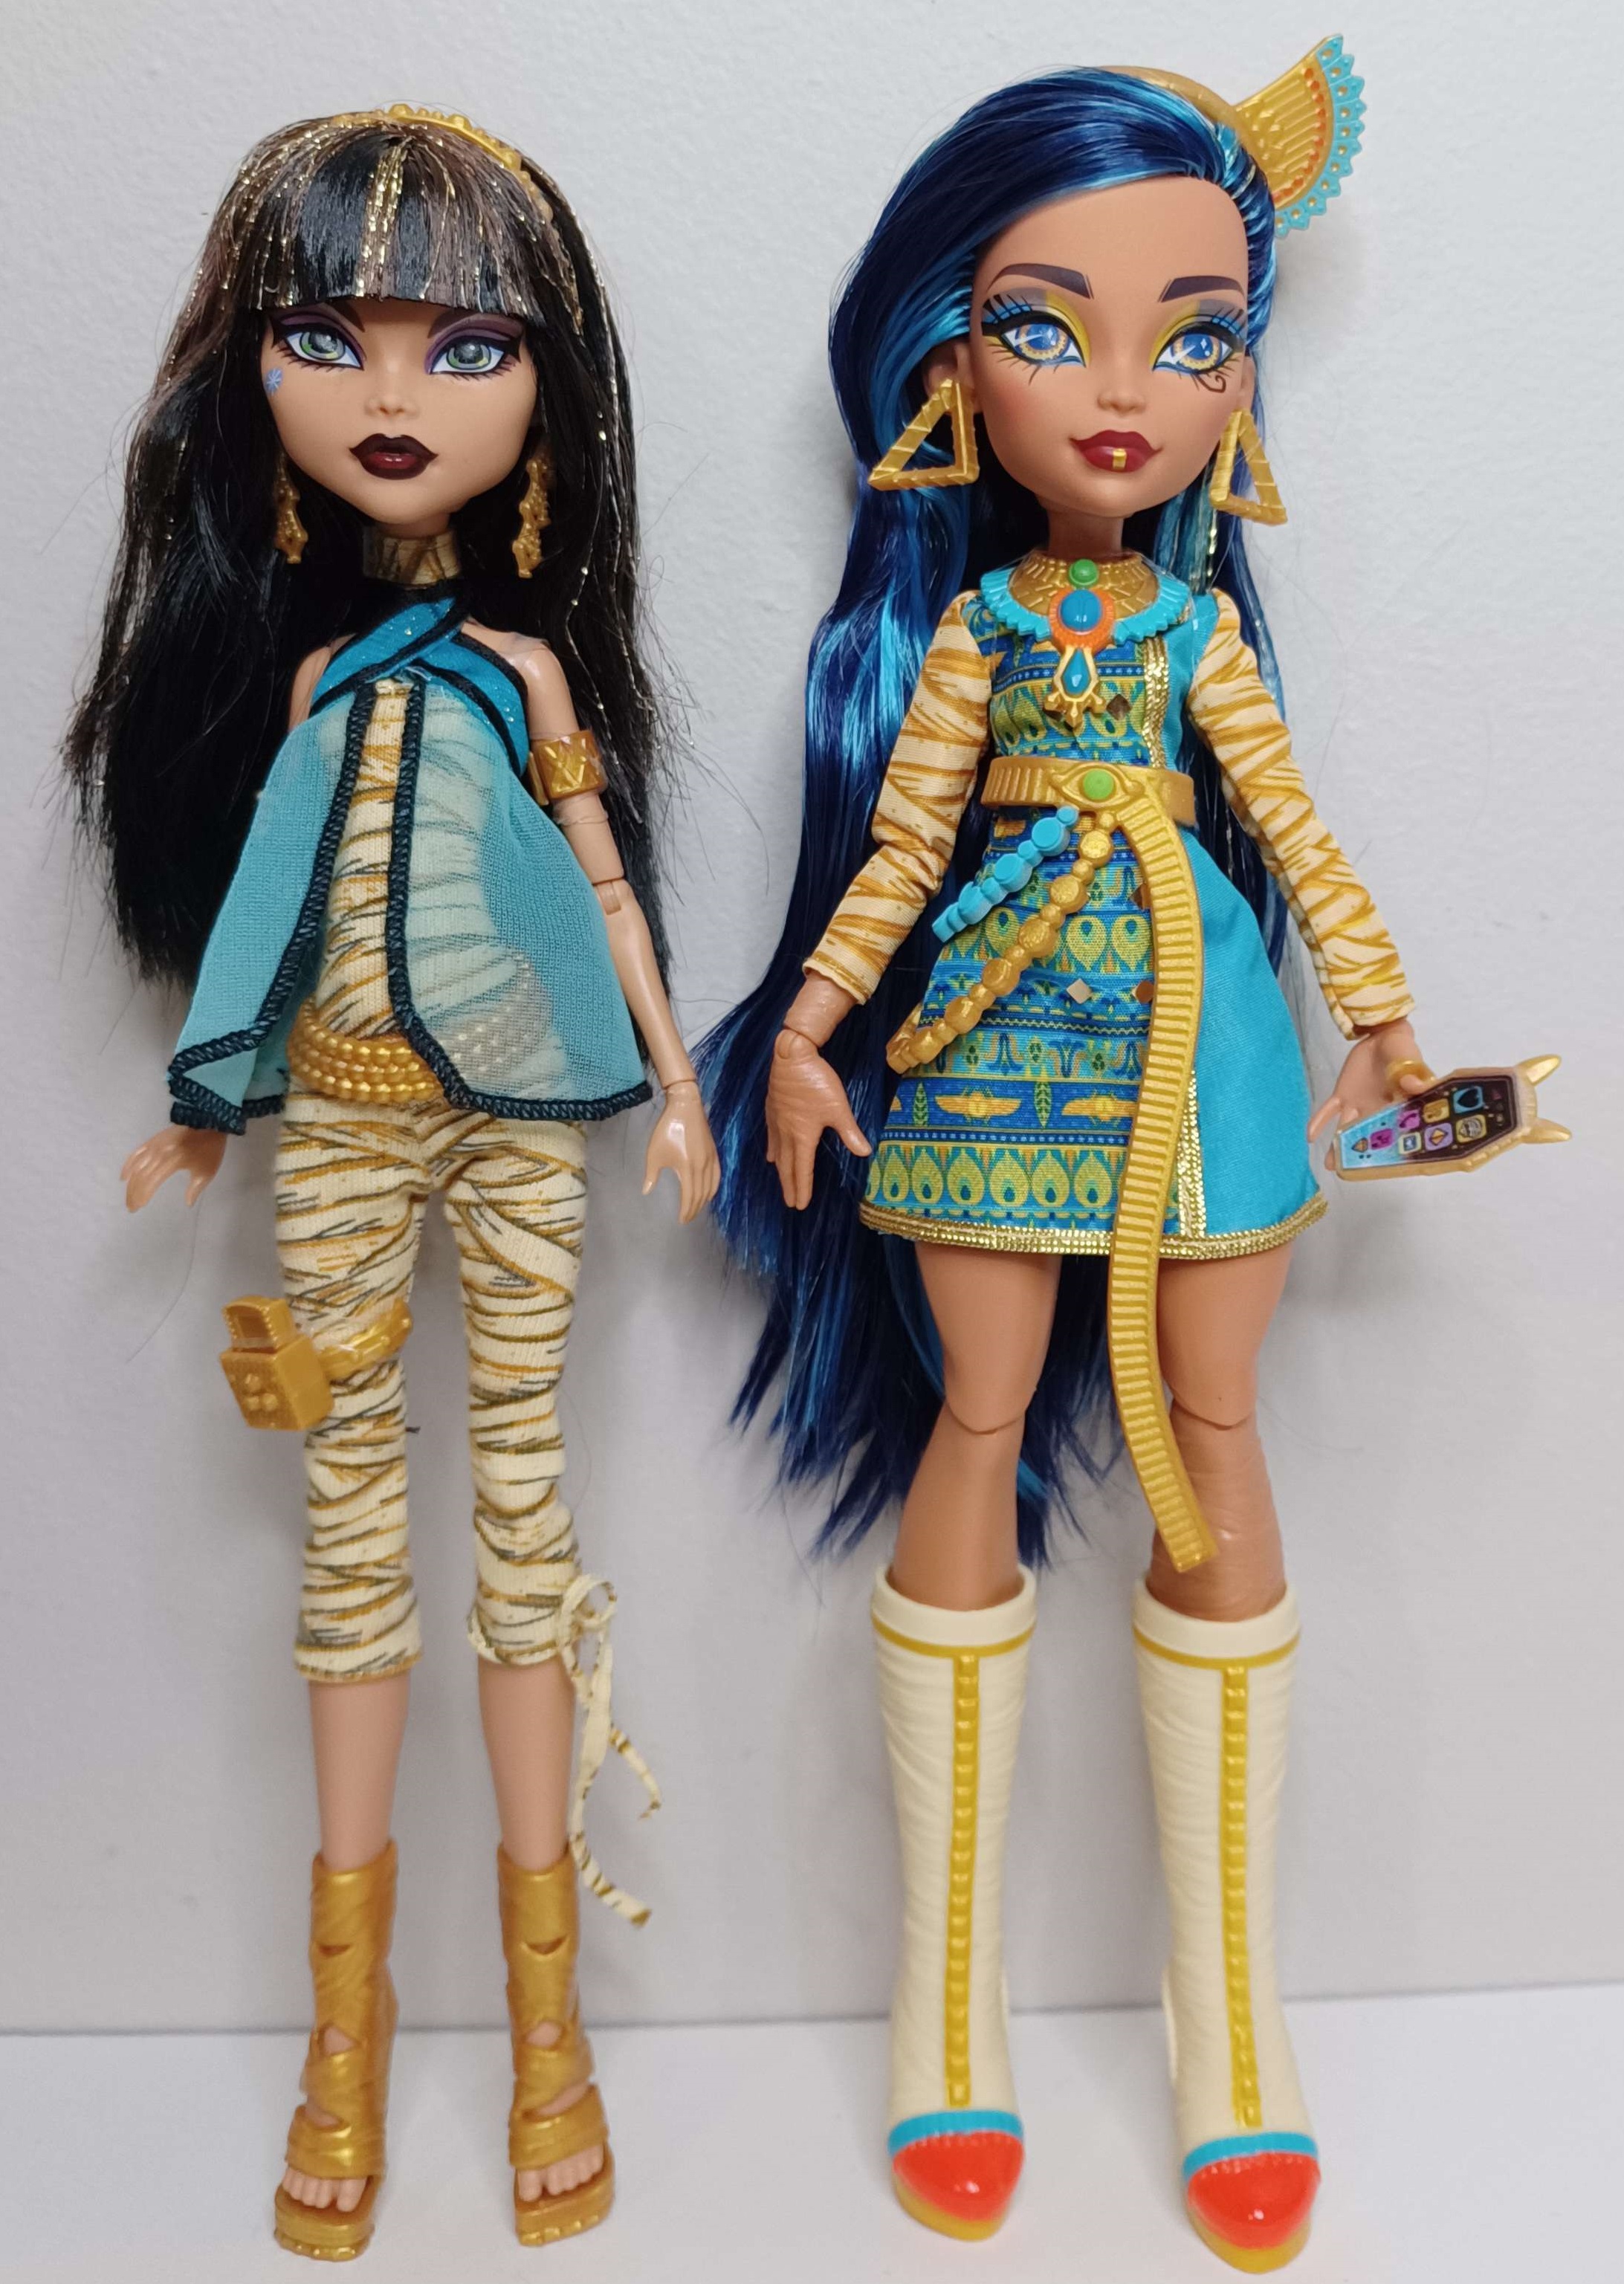 Monster High G3 Cleo De Nile Doll Review!! 